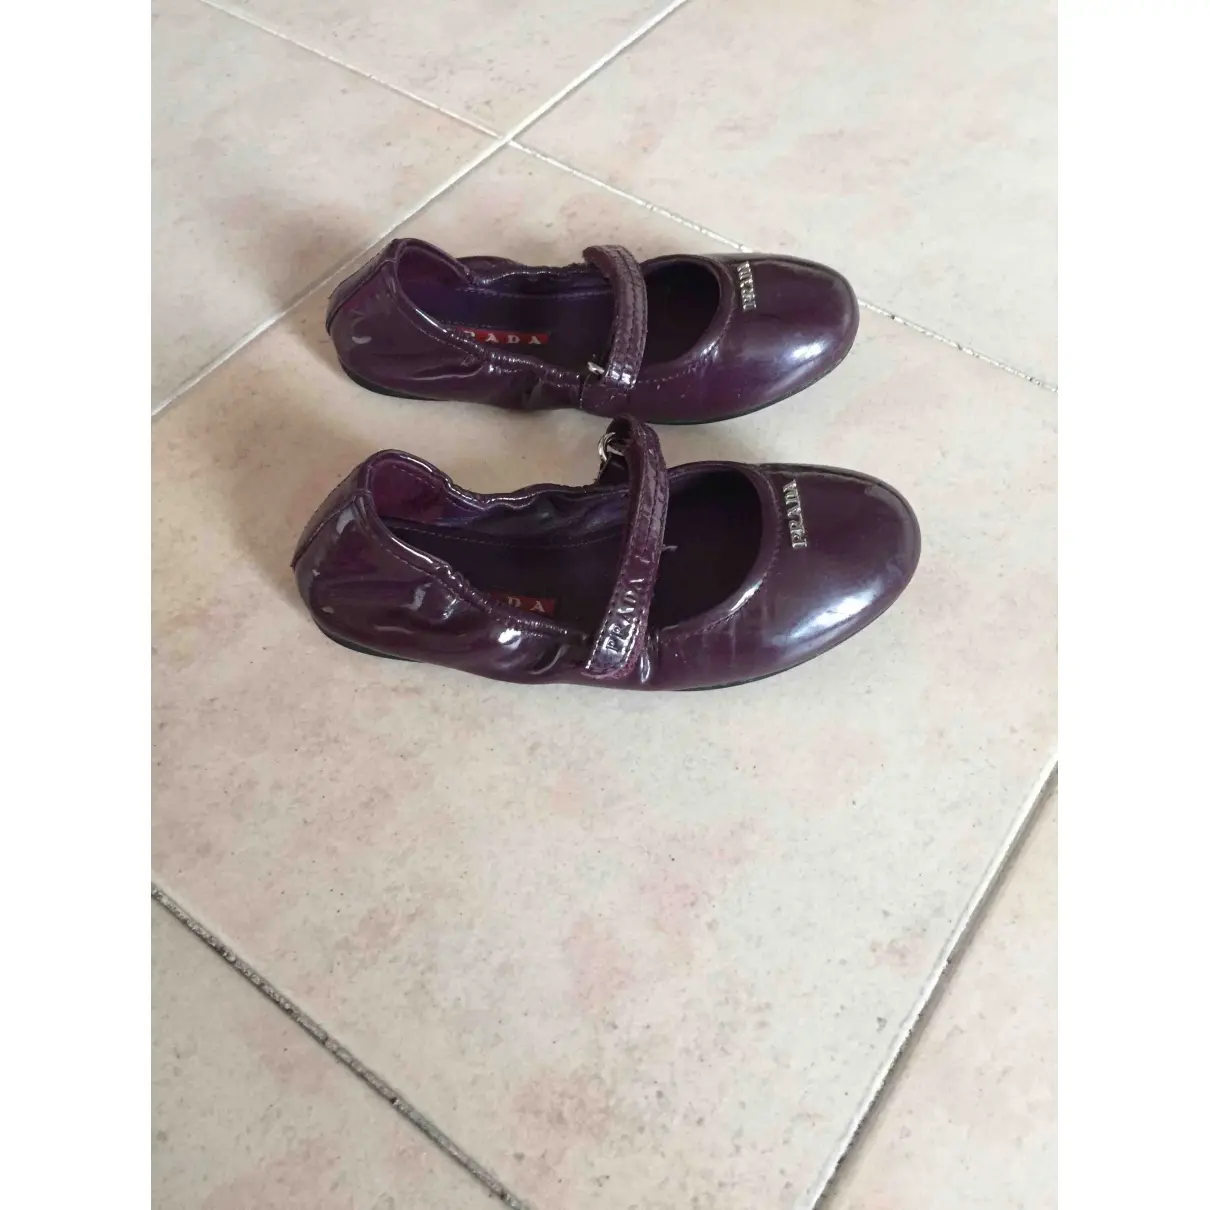 Prada Patent leather ballet flats for sale